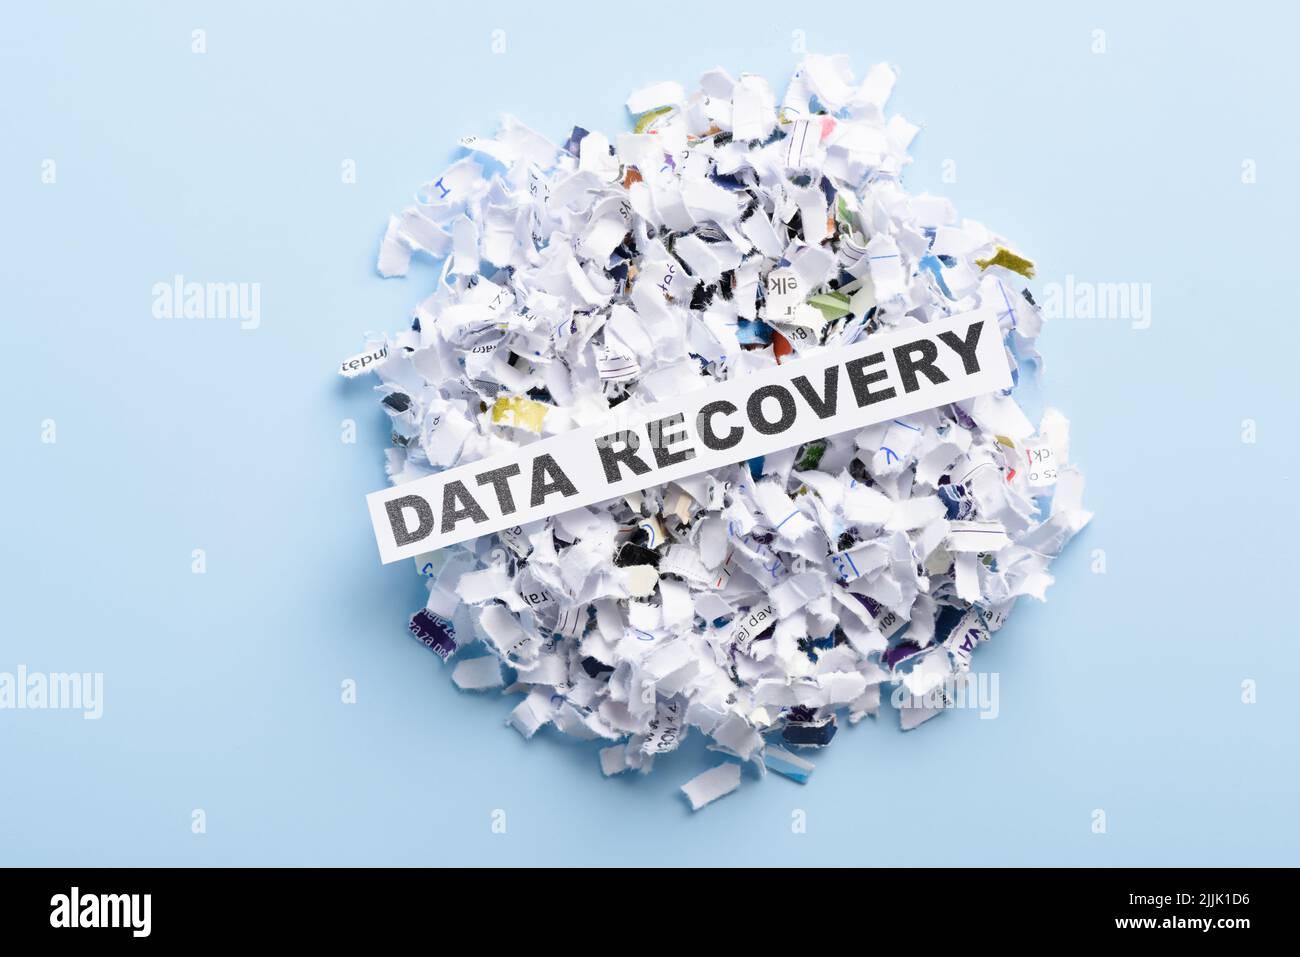 Words Data recovery on top of heap of cross shredded paper concept top view Stock Photo